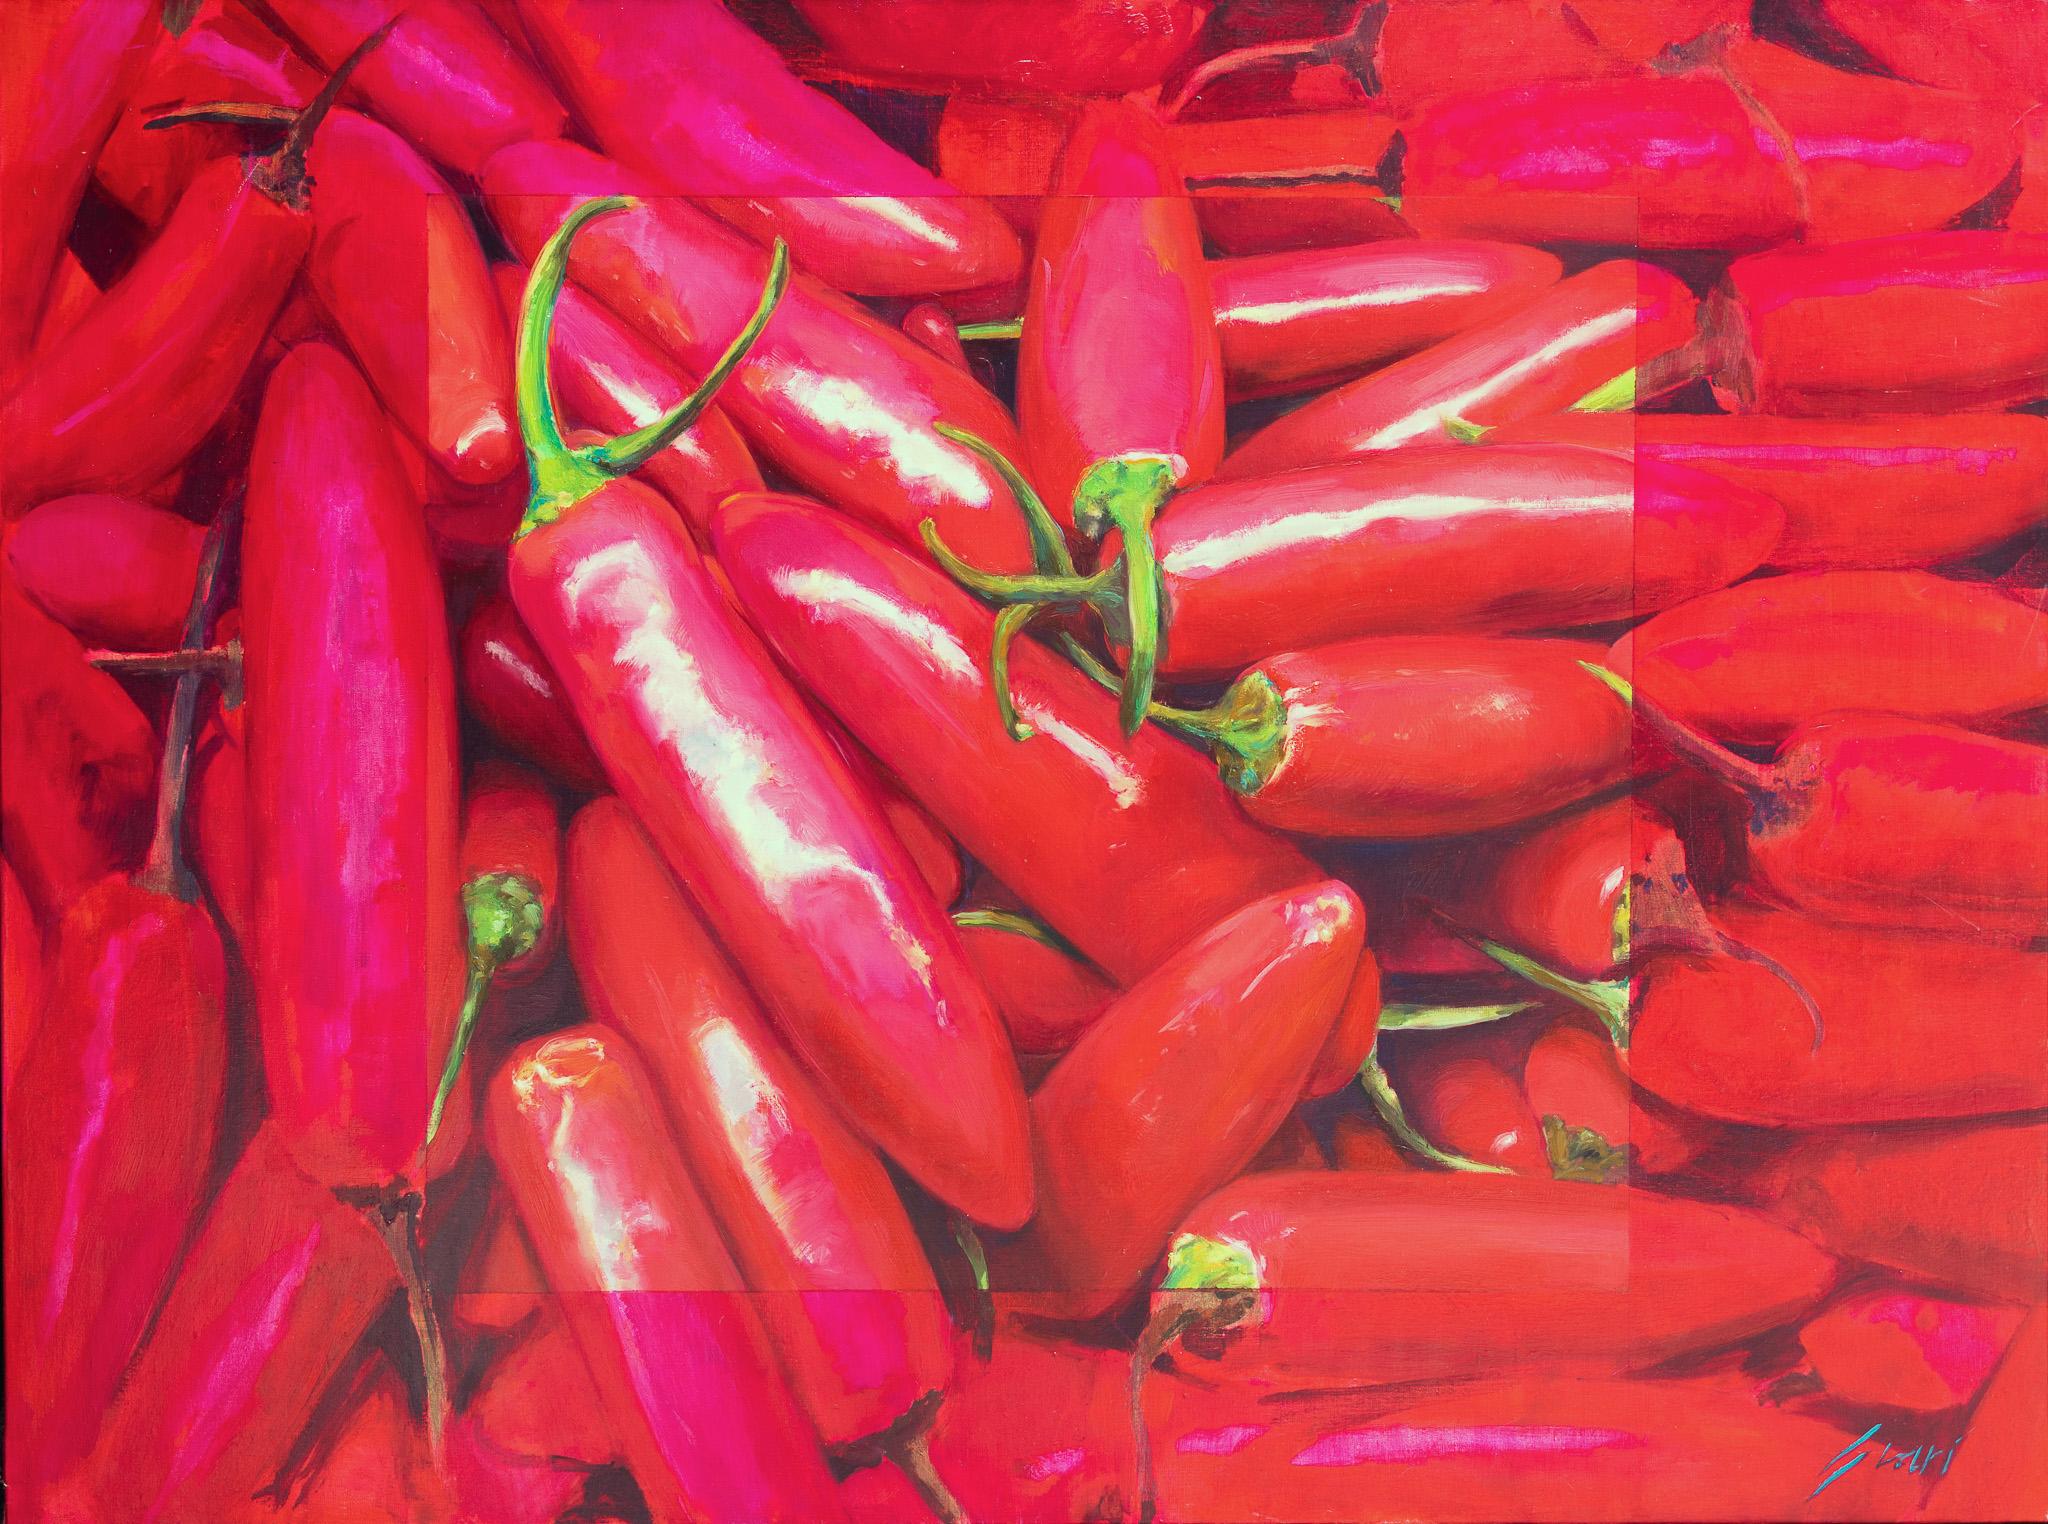 "Hot Chilis" Large Acrylic Painting with Rectangular Abstraction